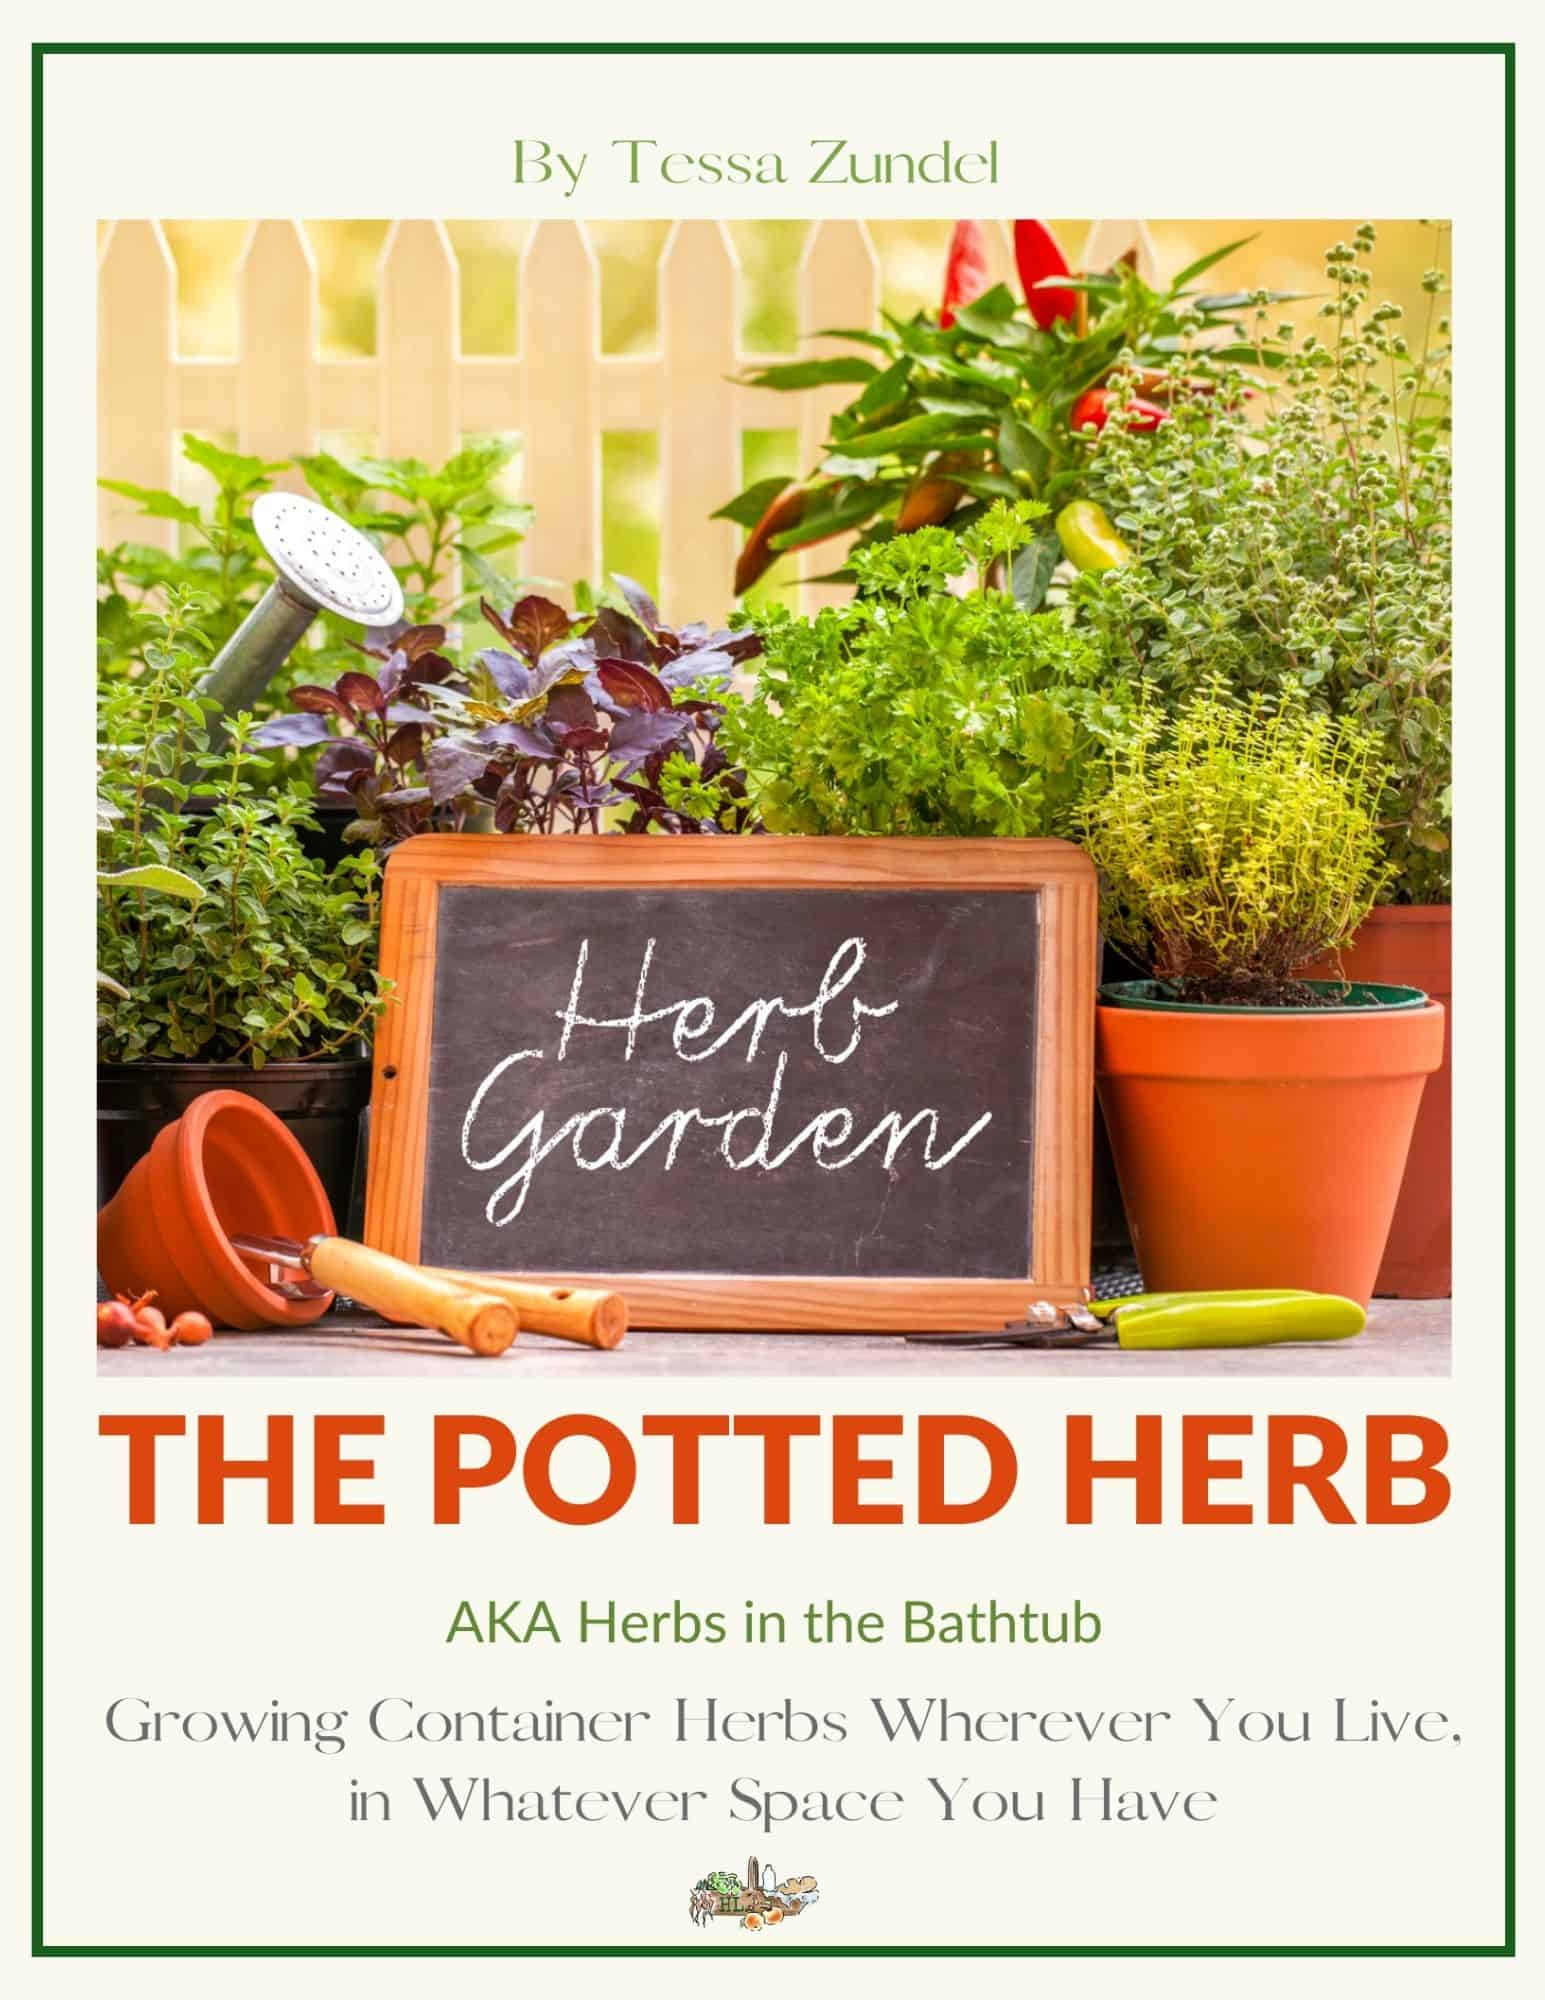 herbs growing in pots with trowels and a sign